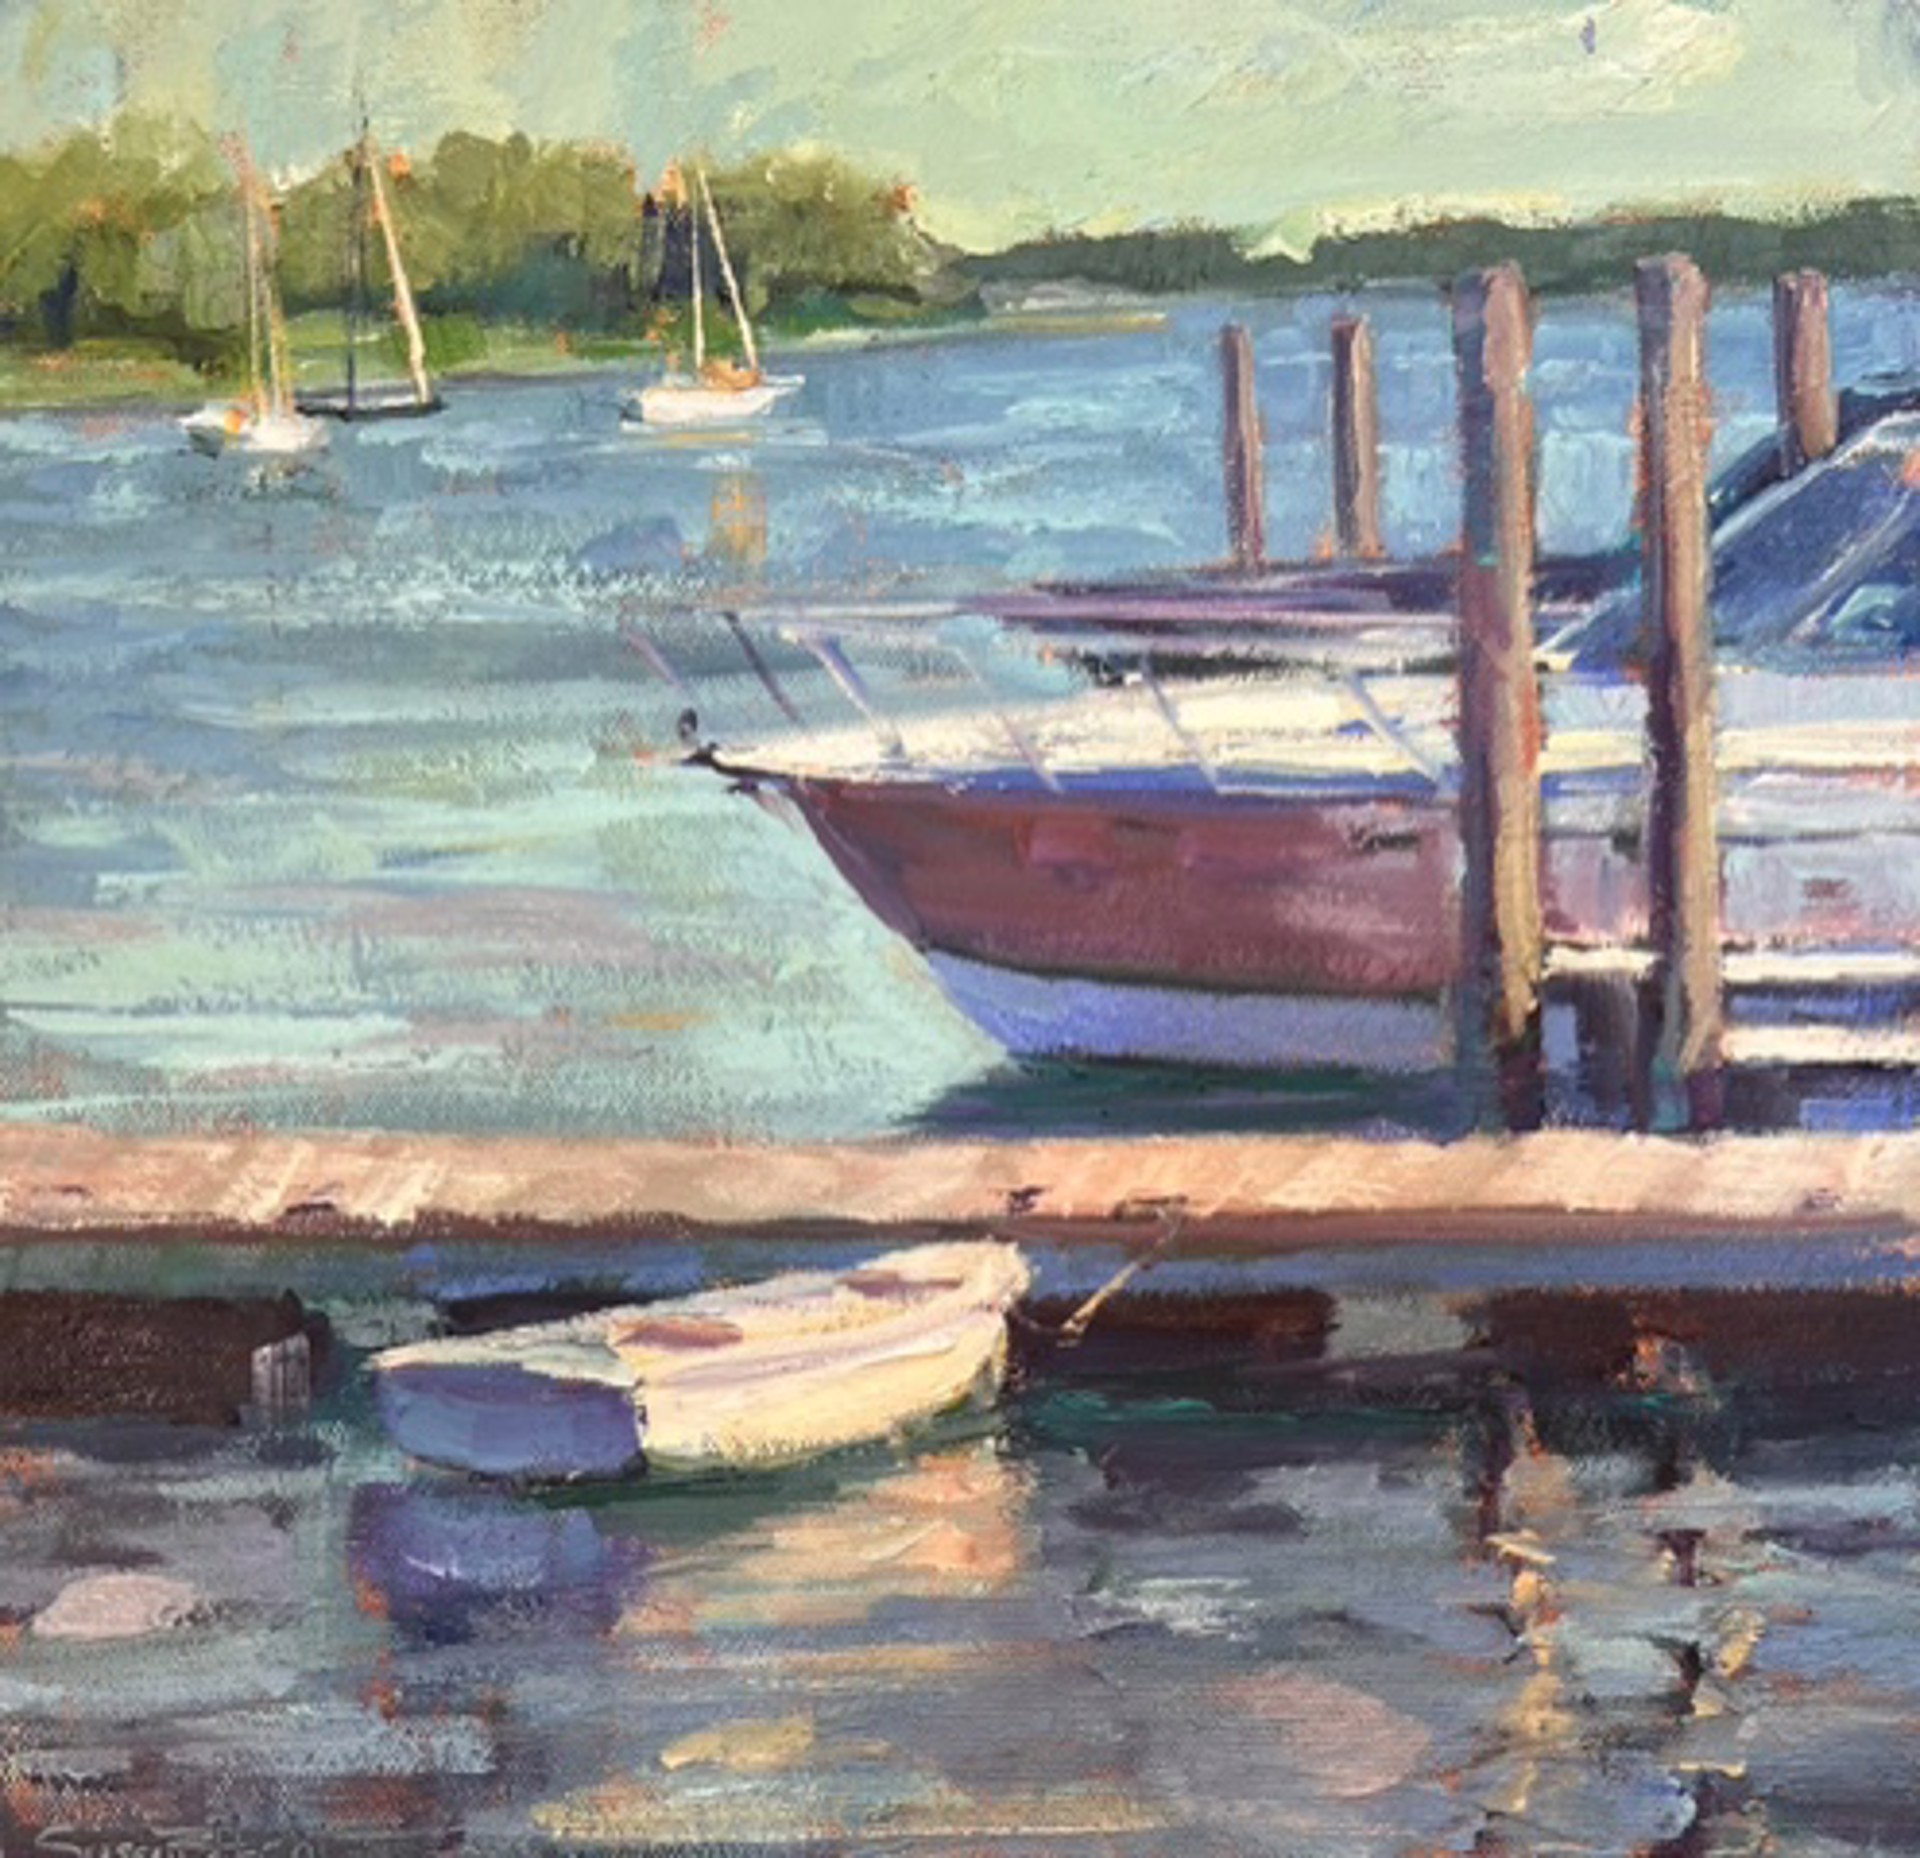 Docked by Susan Hecht